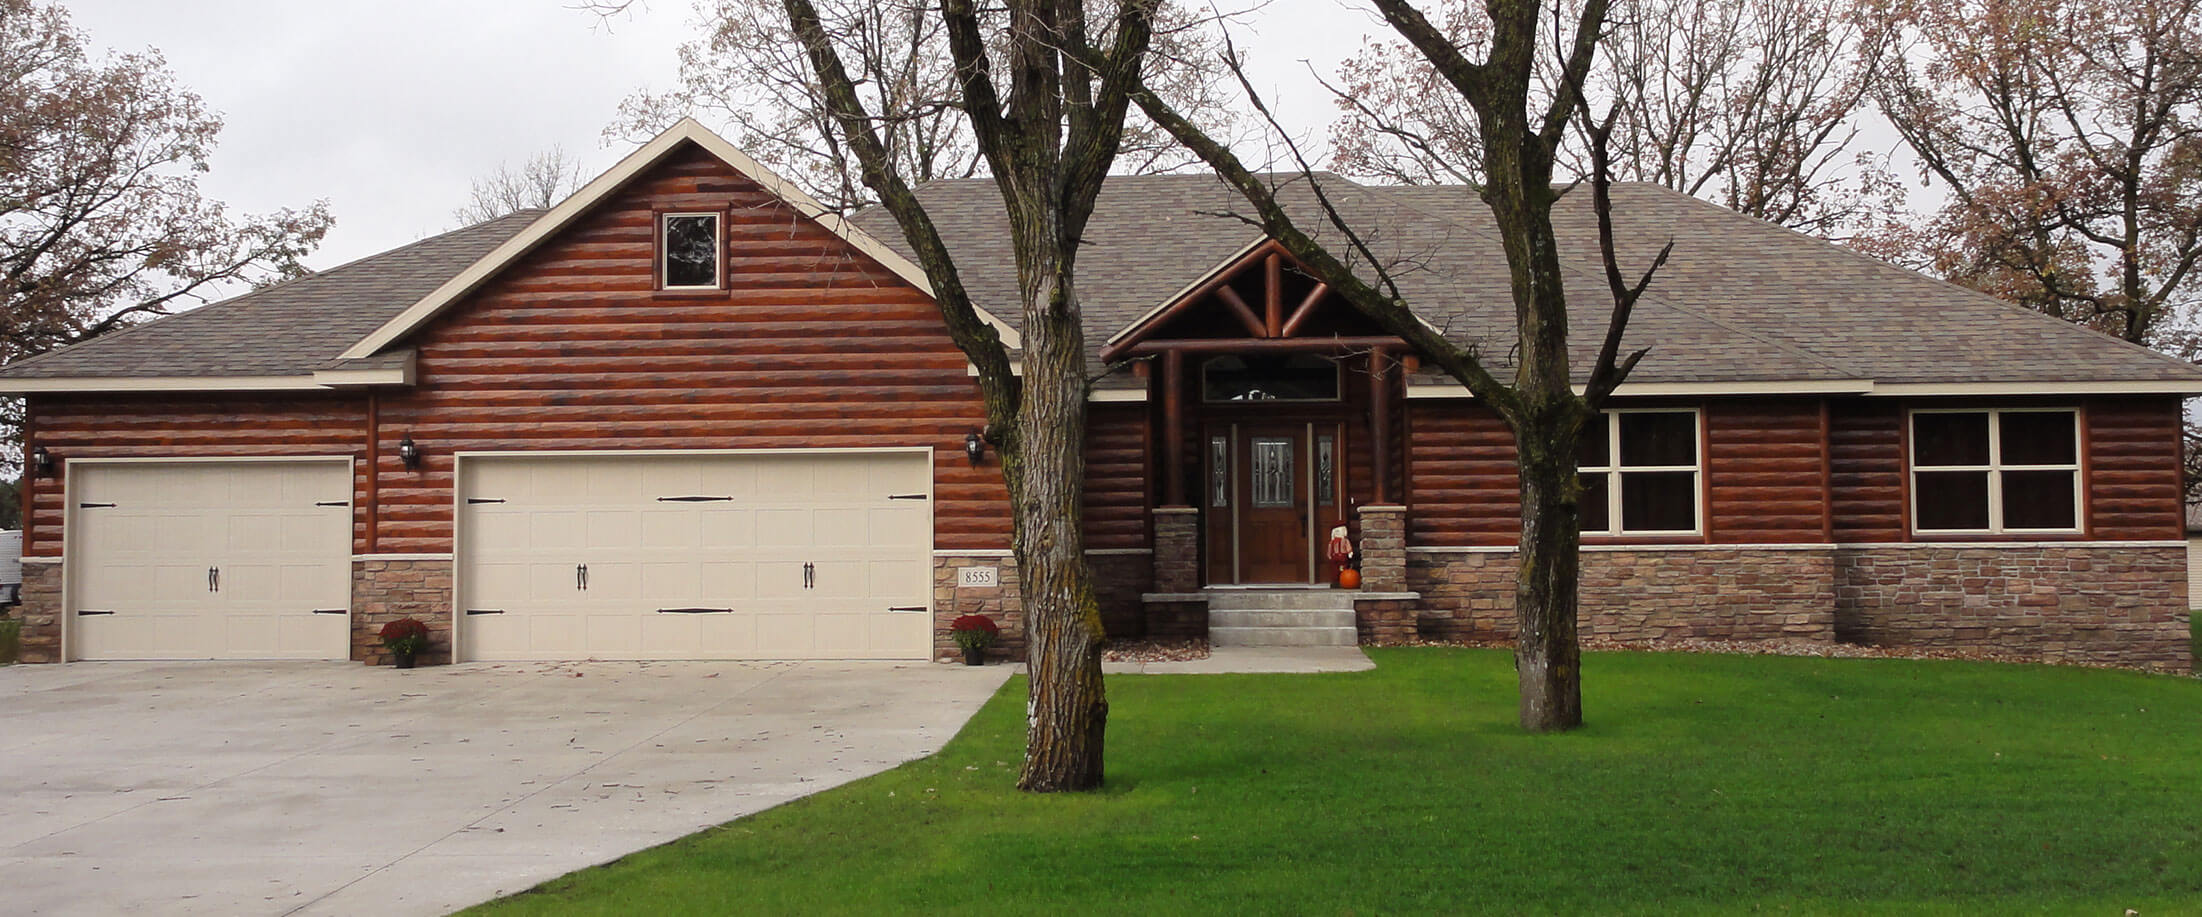 Exterior of a log style, single family home built by Lifestyle Lumber